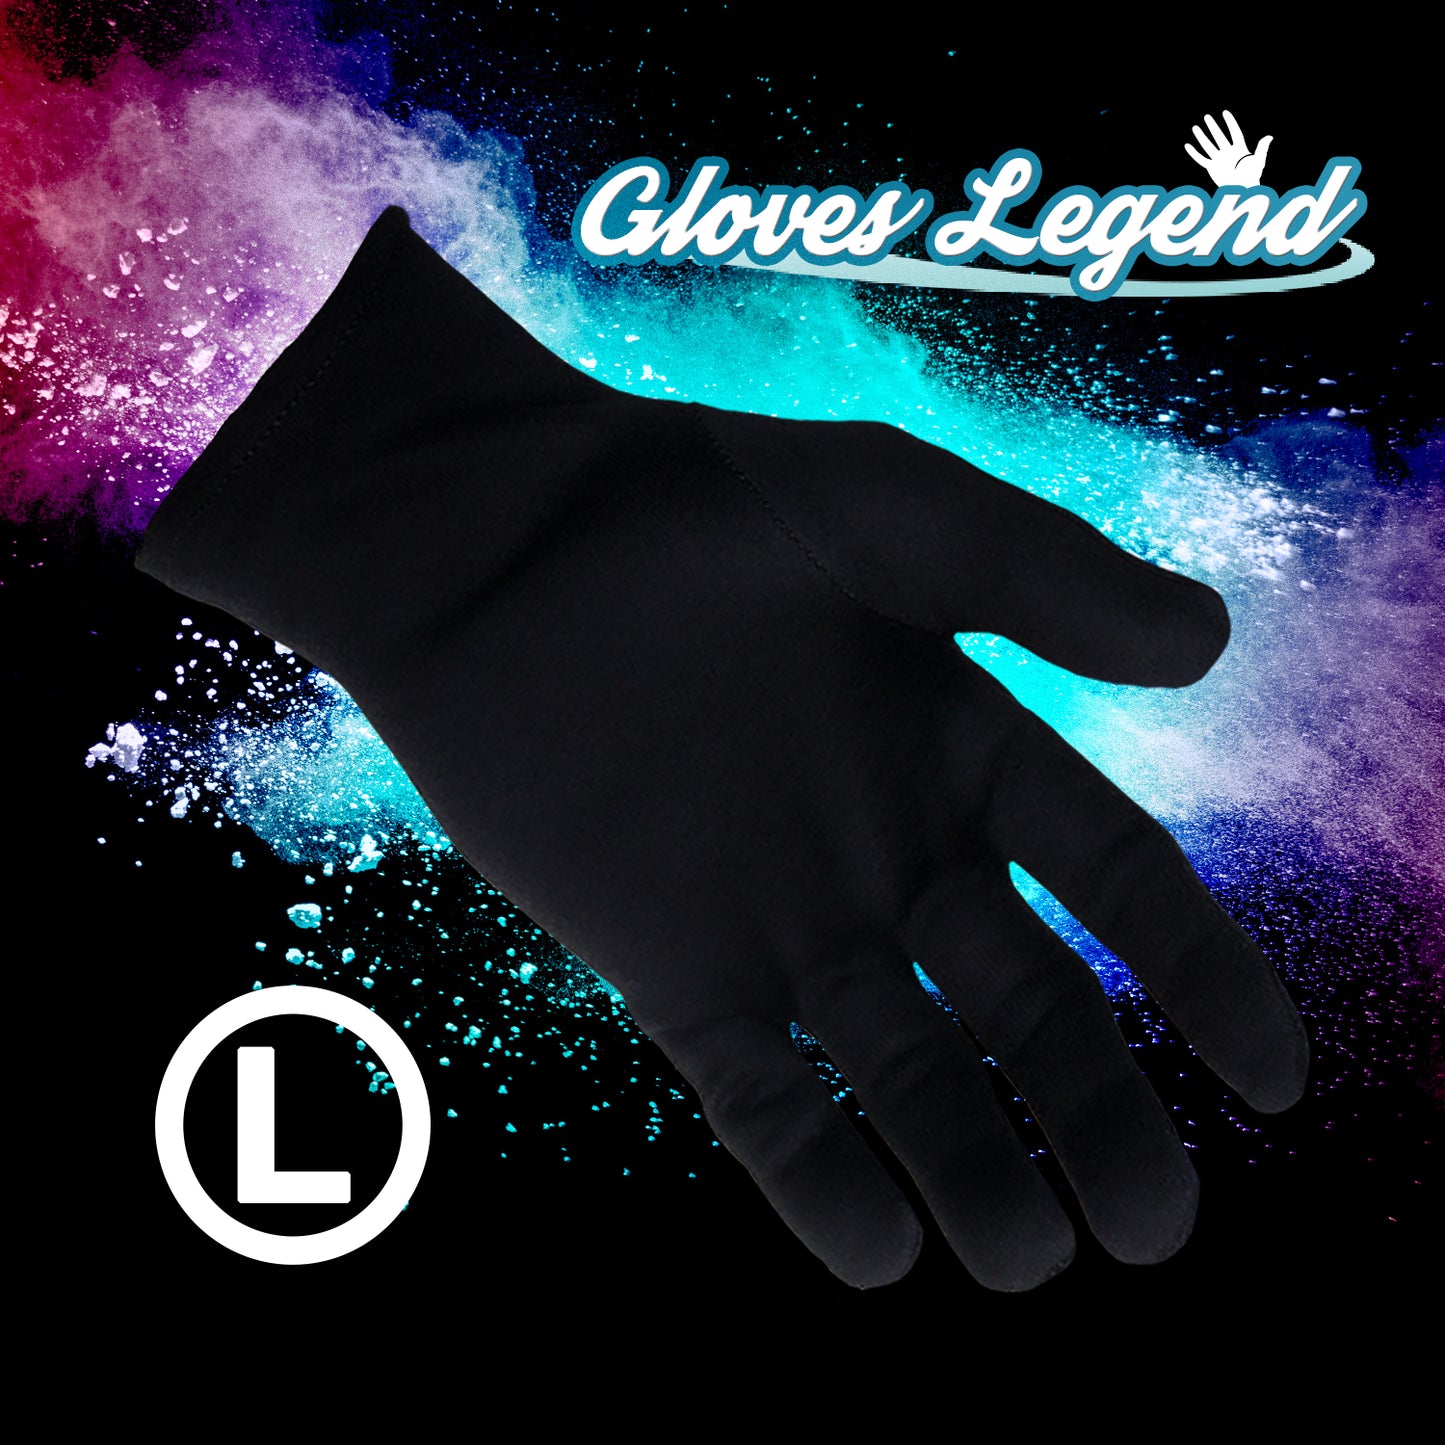 Gloves Legend Black and White Cotton Gloves - 100% Cotton Cloth Gloves - Size Large